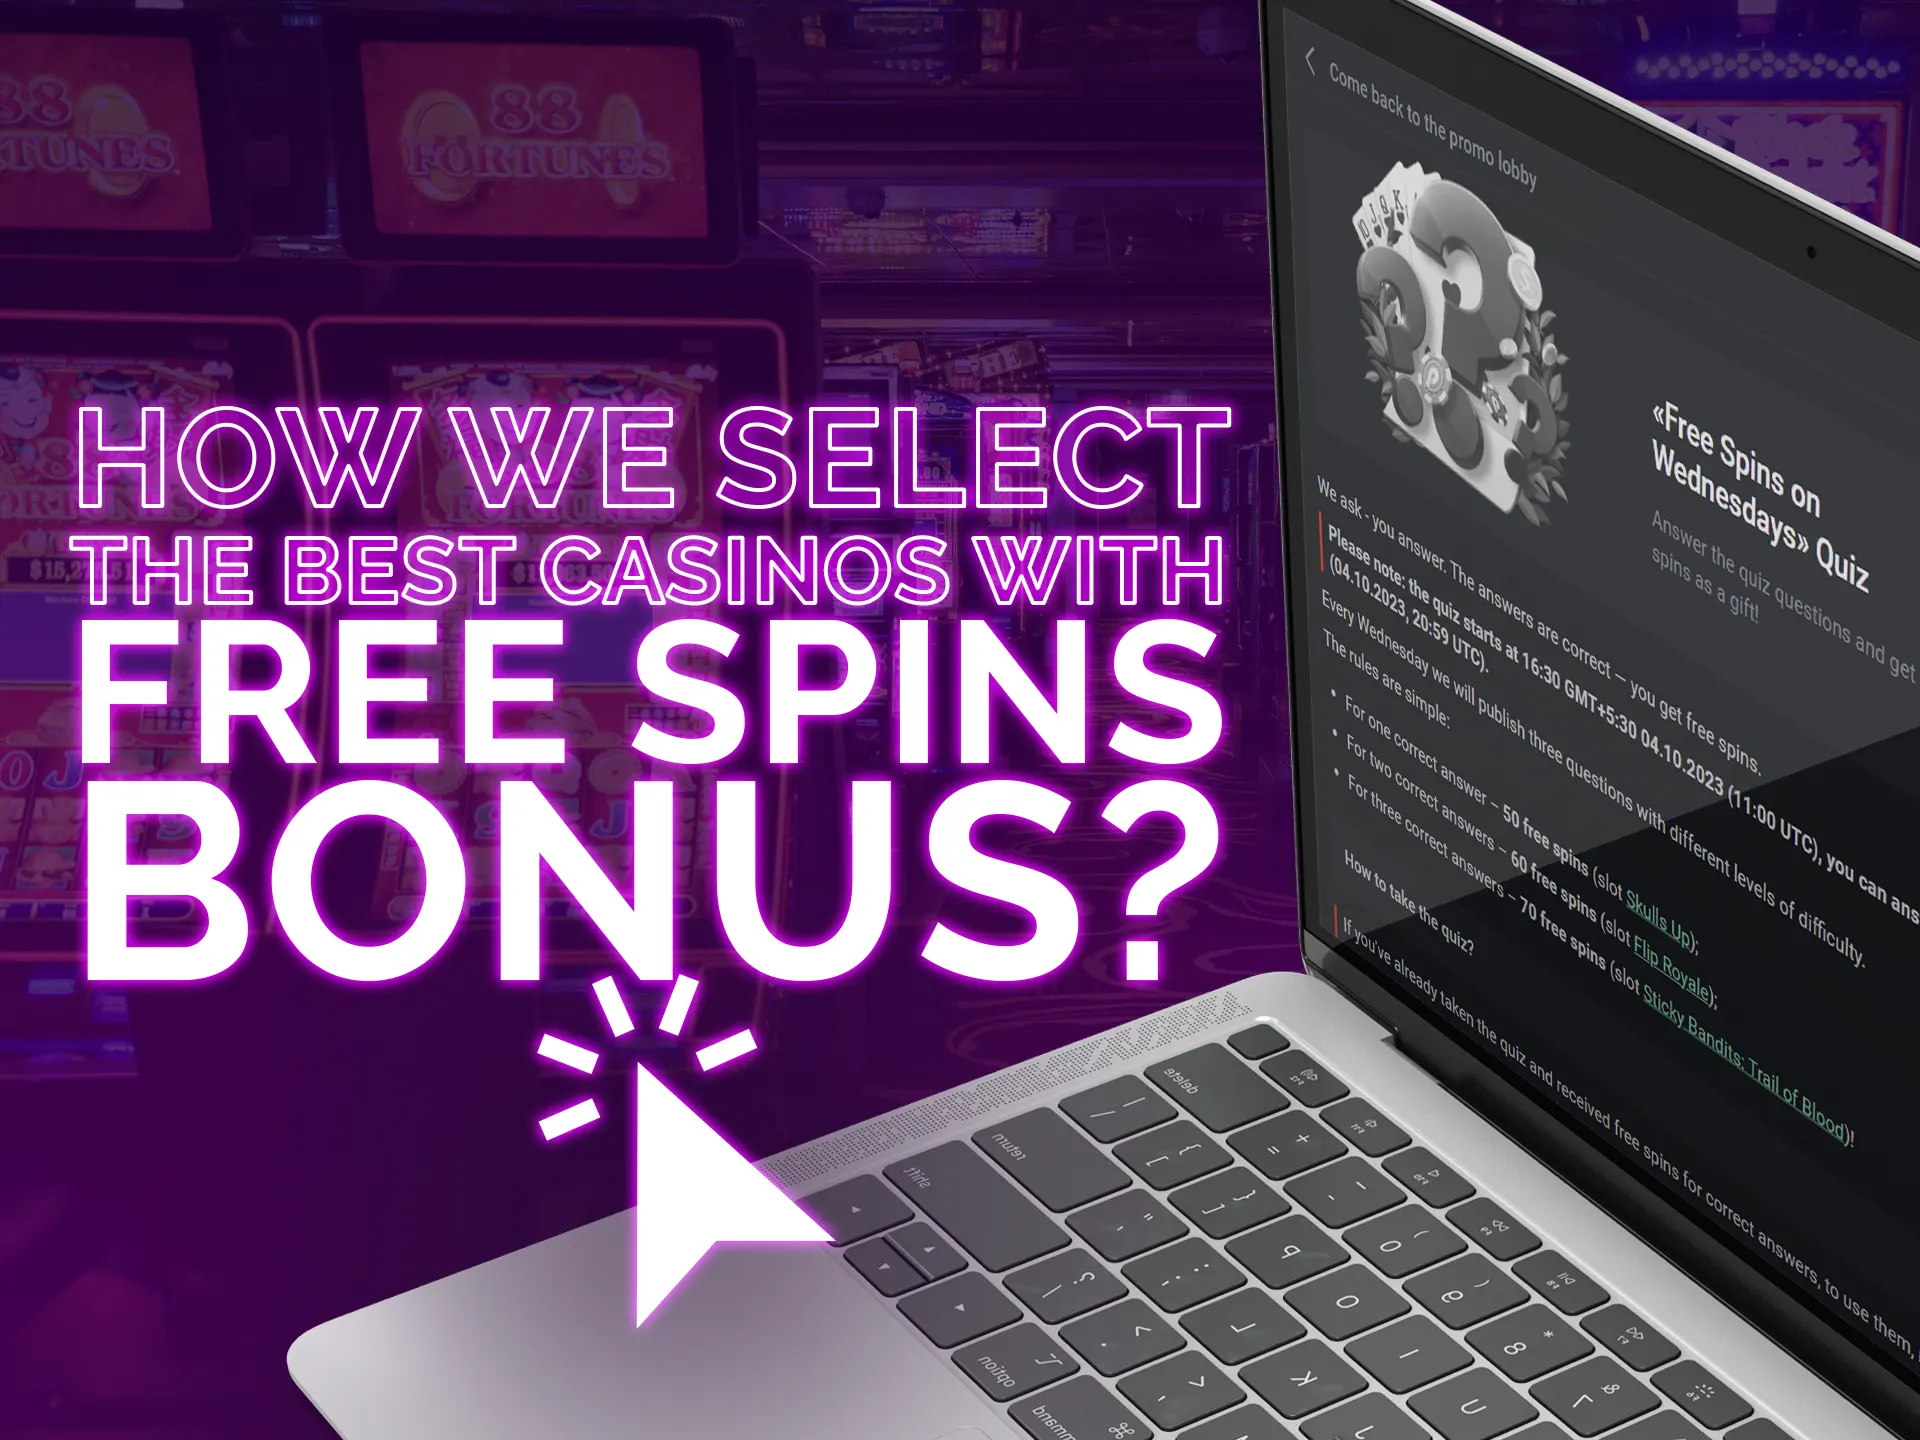 Our methods of selecting best casinos with free spins bonuses.